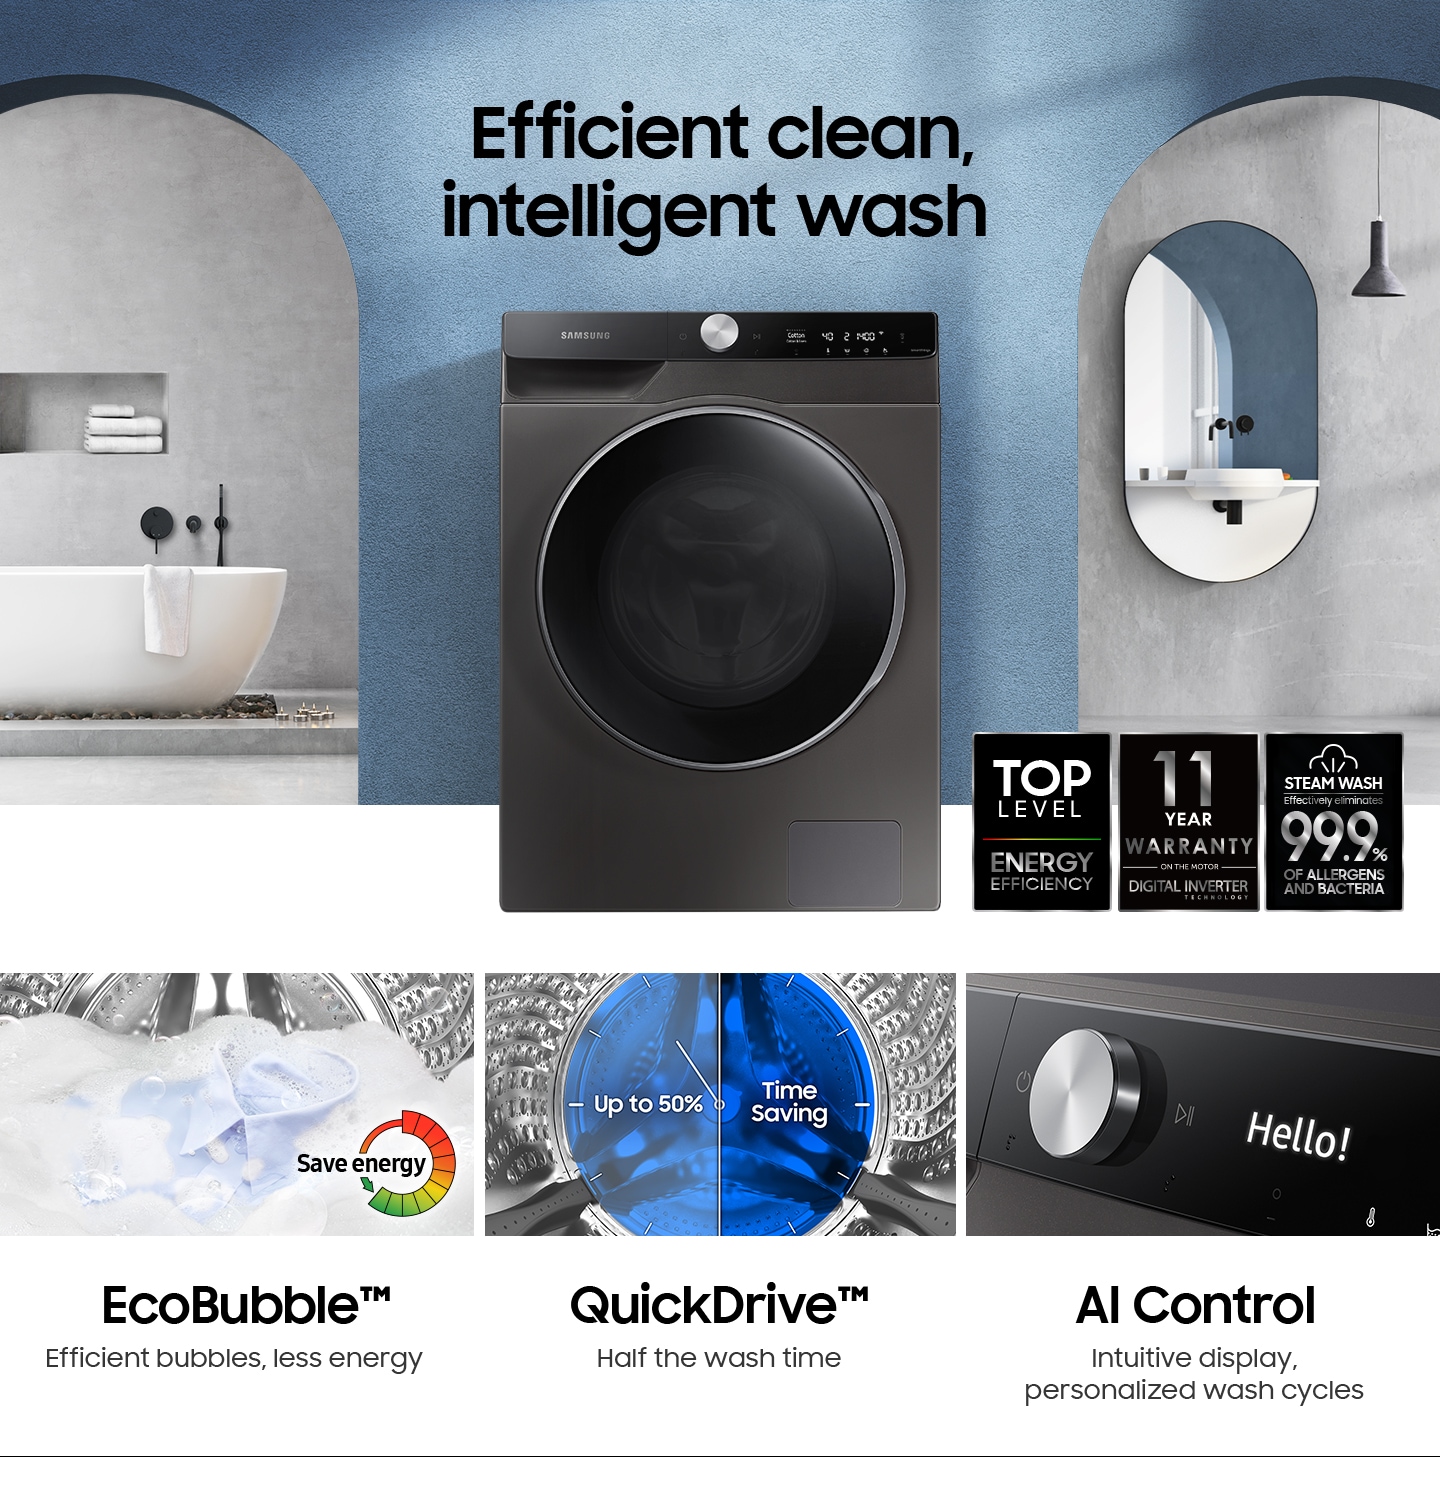 WW7400T features efficient clean, intelligent wash. It has Top level of energy efficiency, 11 year warranty on the DIT motor and effectively eliminates 99.9% of allergens and bacteria with steam wash. Eco Bubble saves energy as create bubble efficiently with less energy. Quick Drive is Time saving function which half the wash time up to 50%. AI control intuitively displays and personalizes wash cycles.